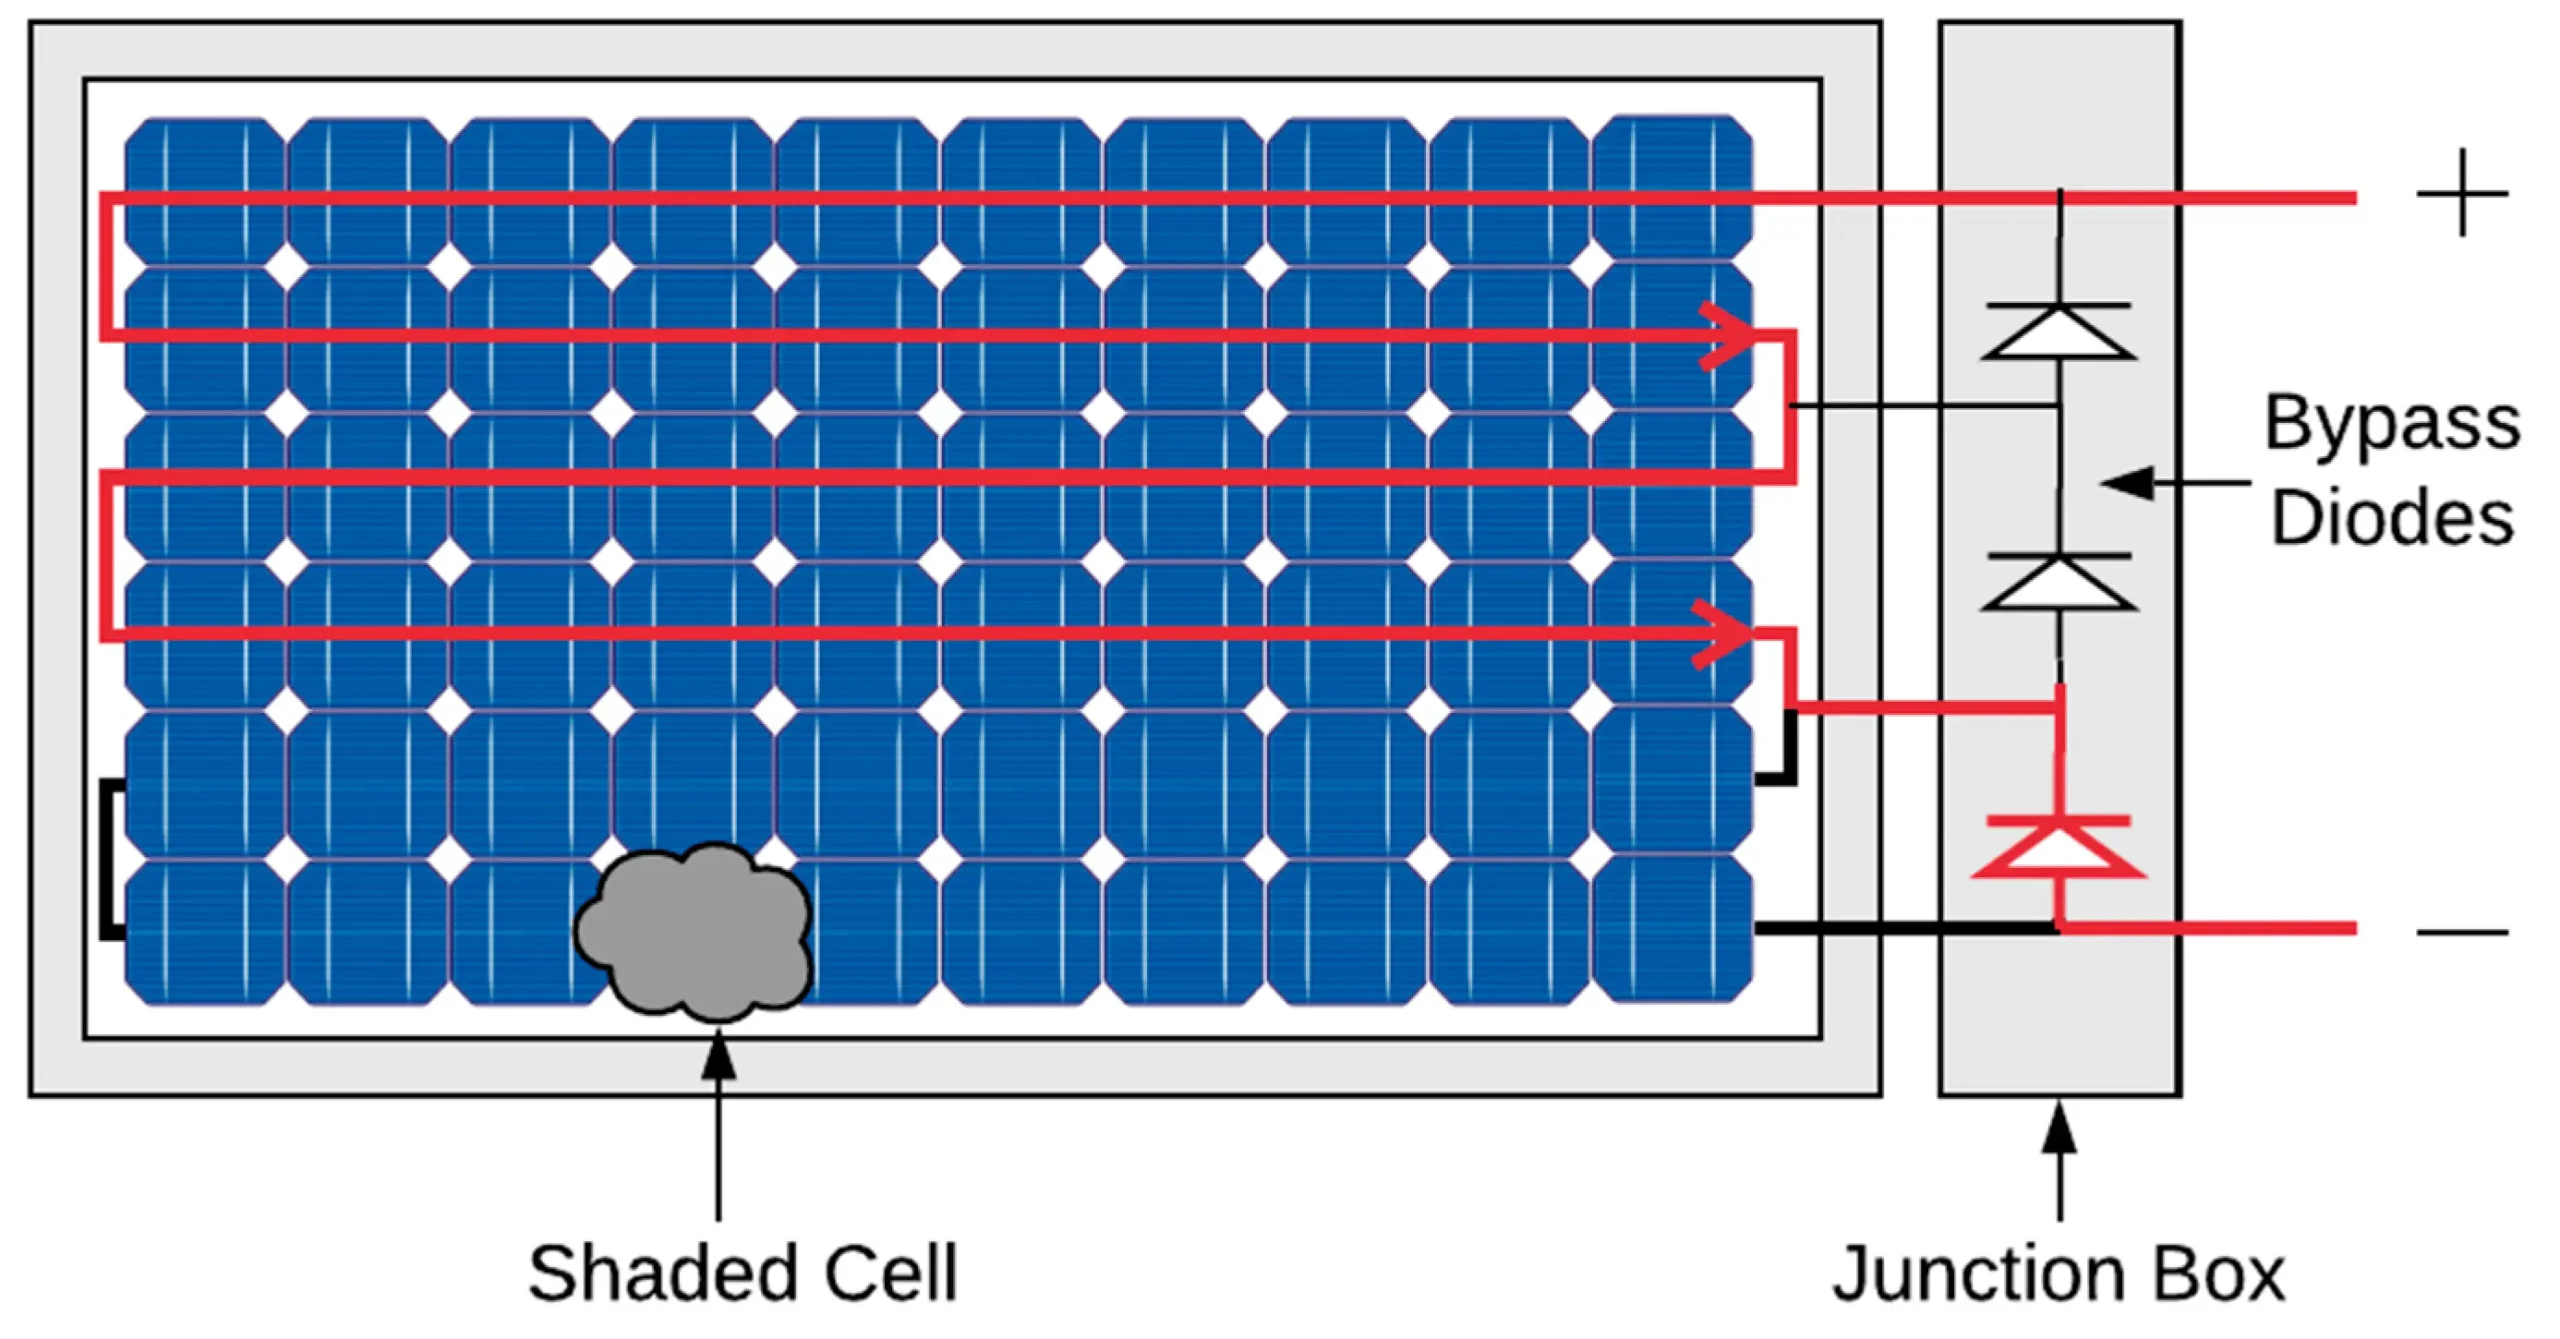 bypass diodes in solar panels - What diodes are used in solar panels